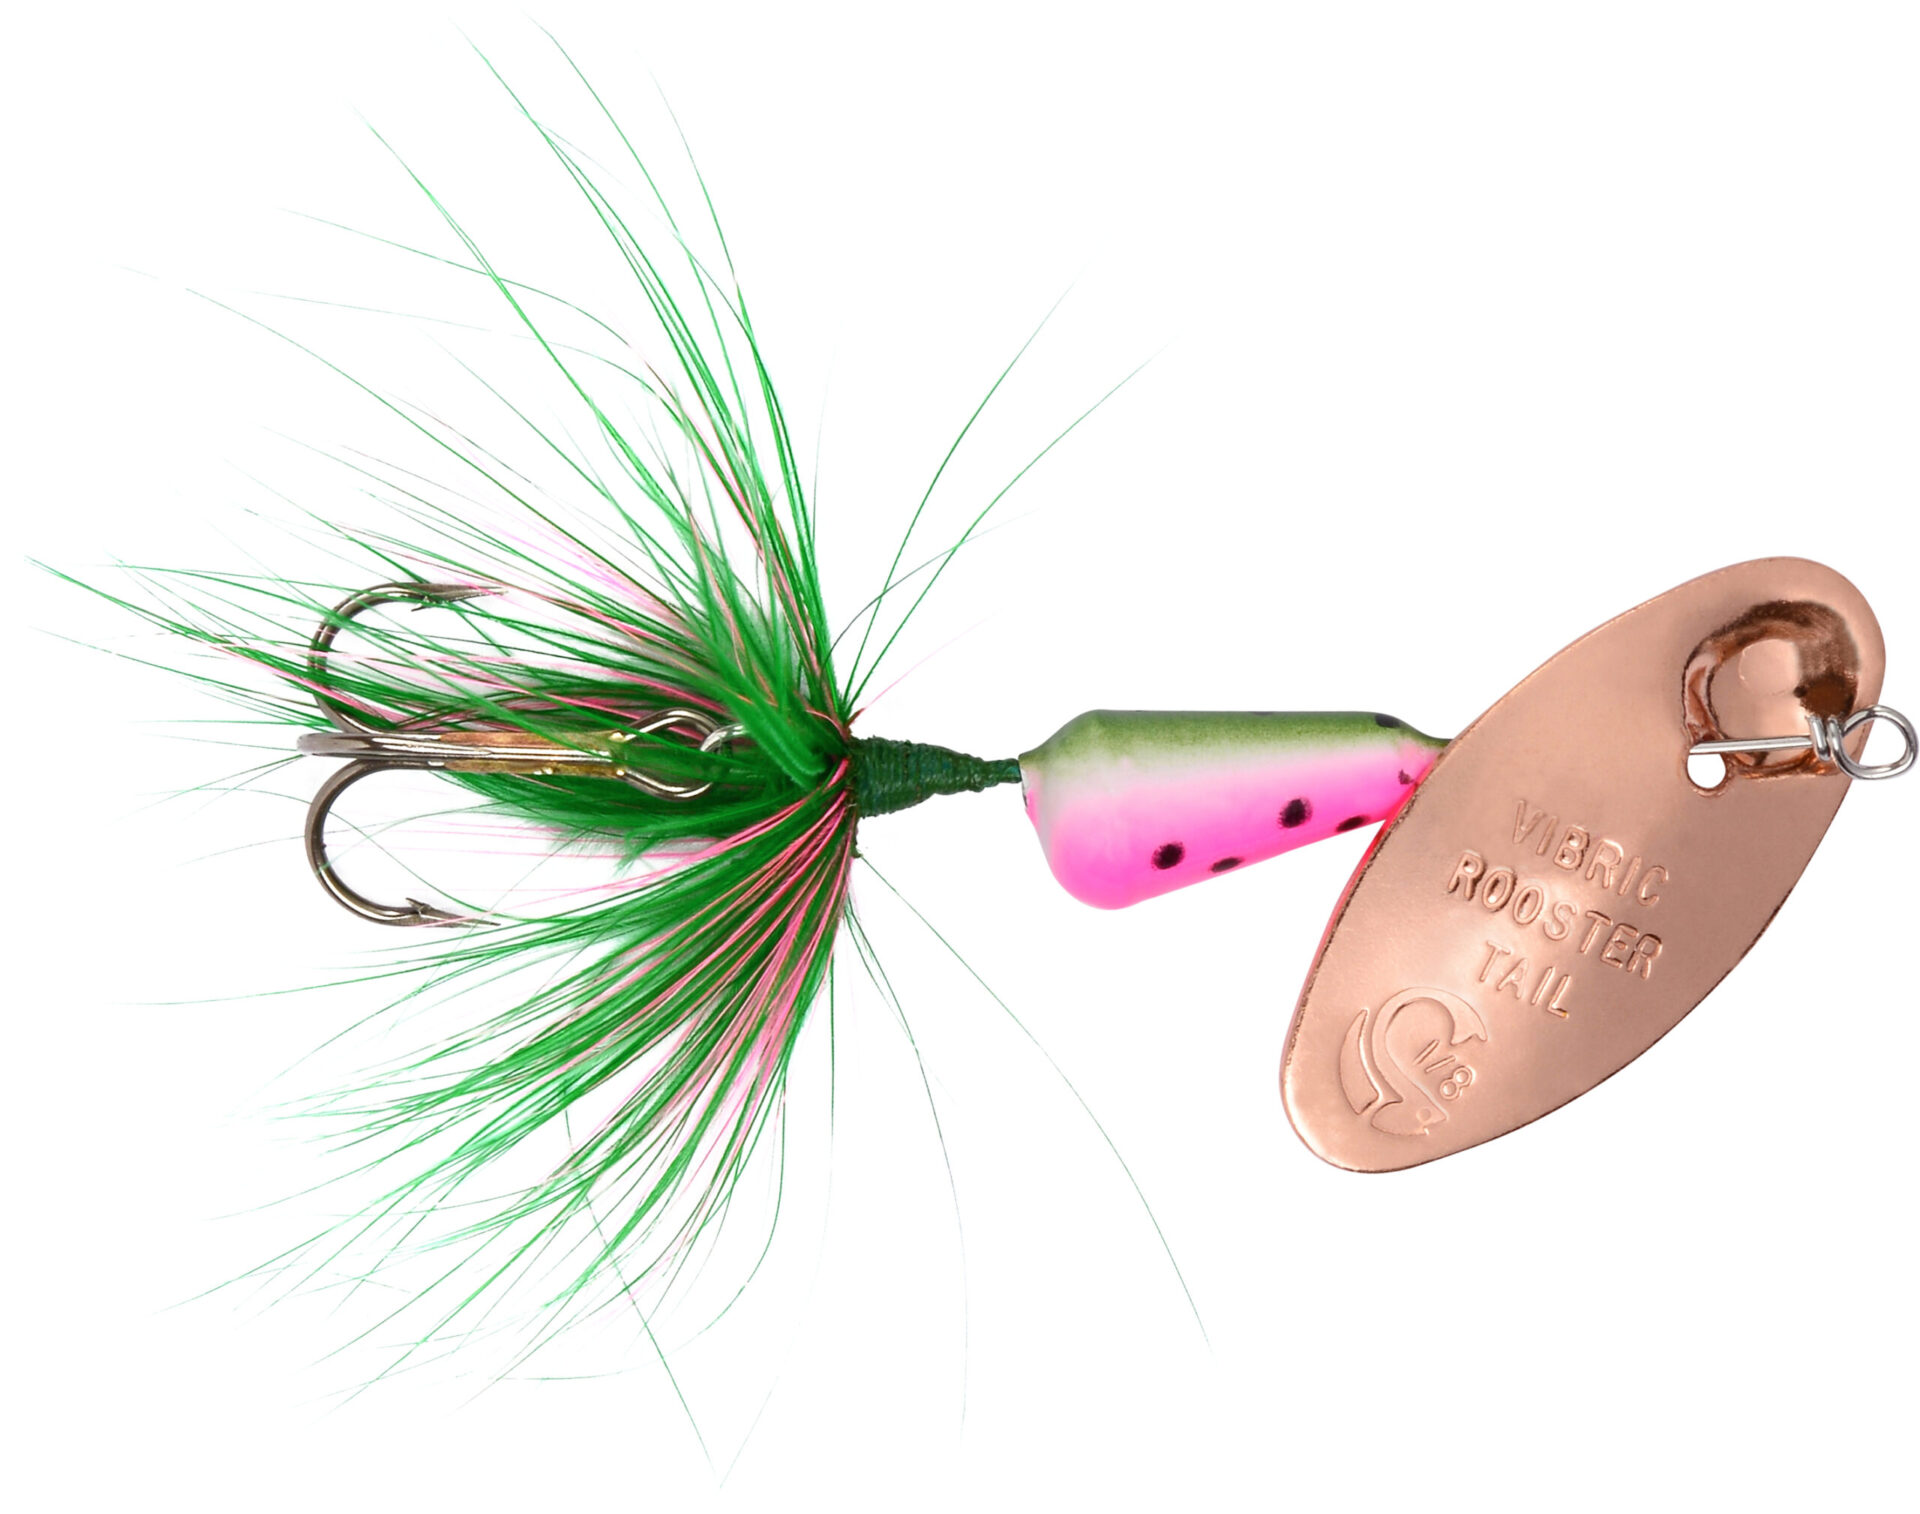 Yakima Bait Worden's Vibric Rooster Tail Lure, Glitter Flame, 1/2